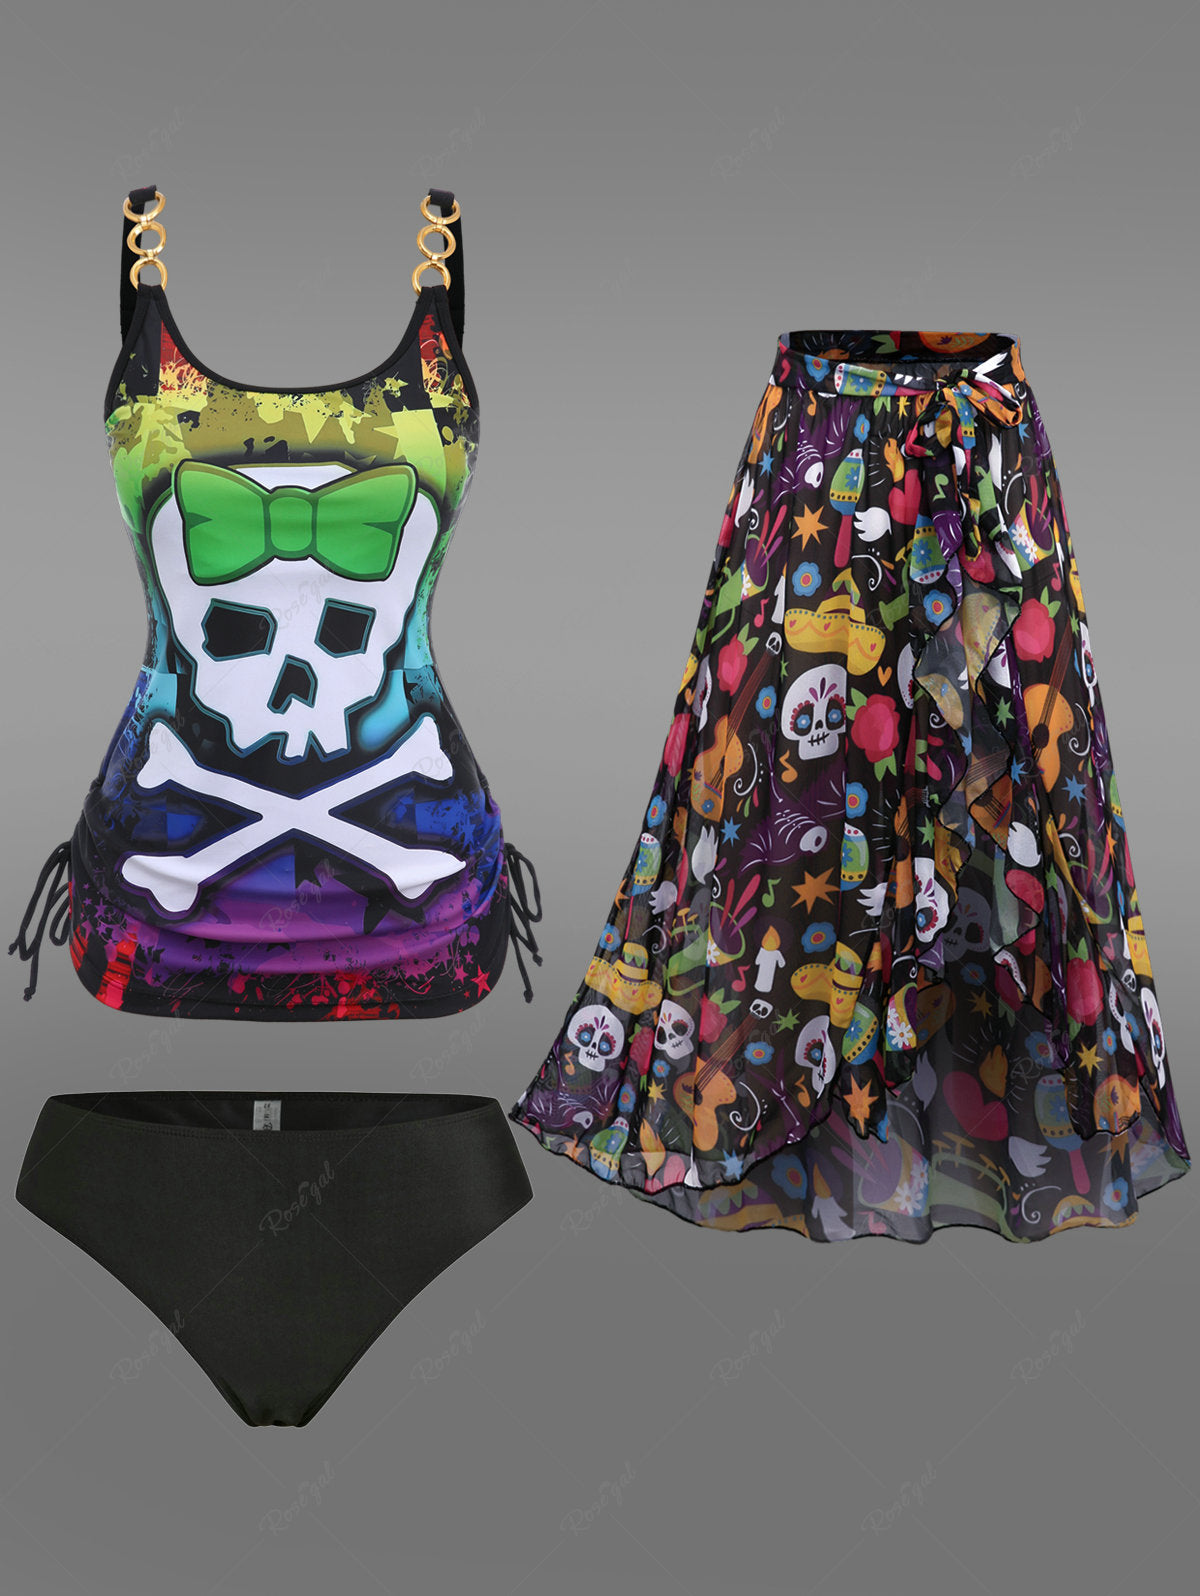 Gothic Skull Bowknot Colorblock Painting Splatter Print Cinched Top and Bottom Tankini Set and Floral Mesh Wrap Flounce Asymmetric Sarong Three Piece Swimsuit